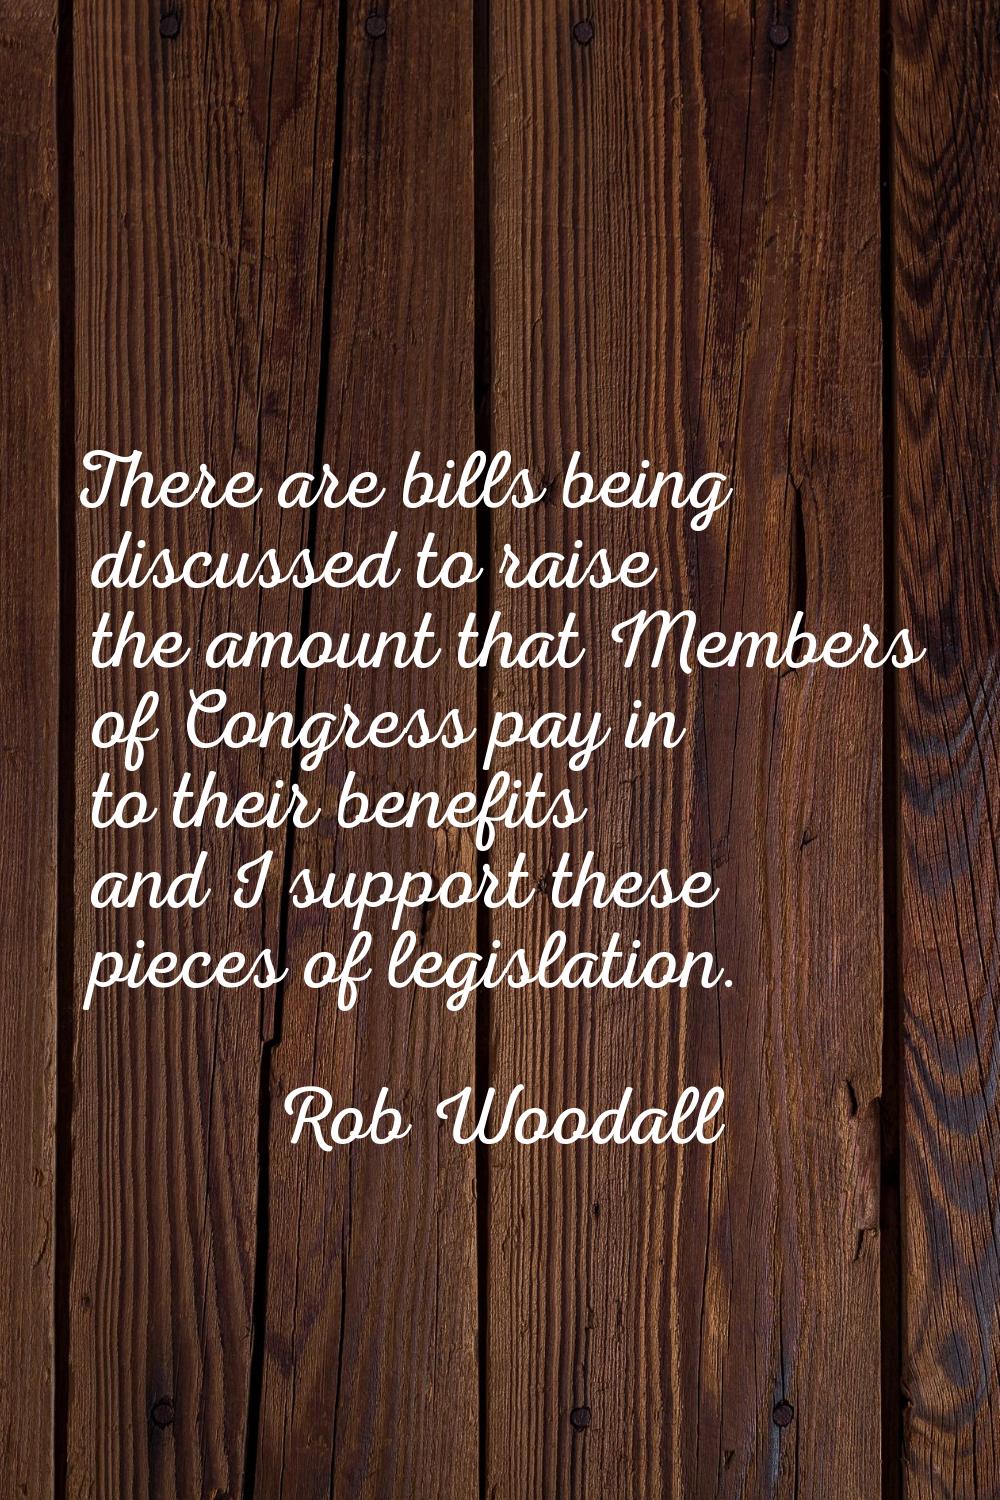 There are bills being discussed to raise the amount that Members of Congress pay in to their benefi